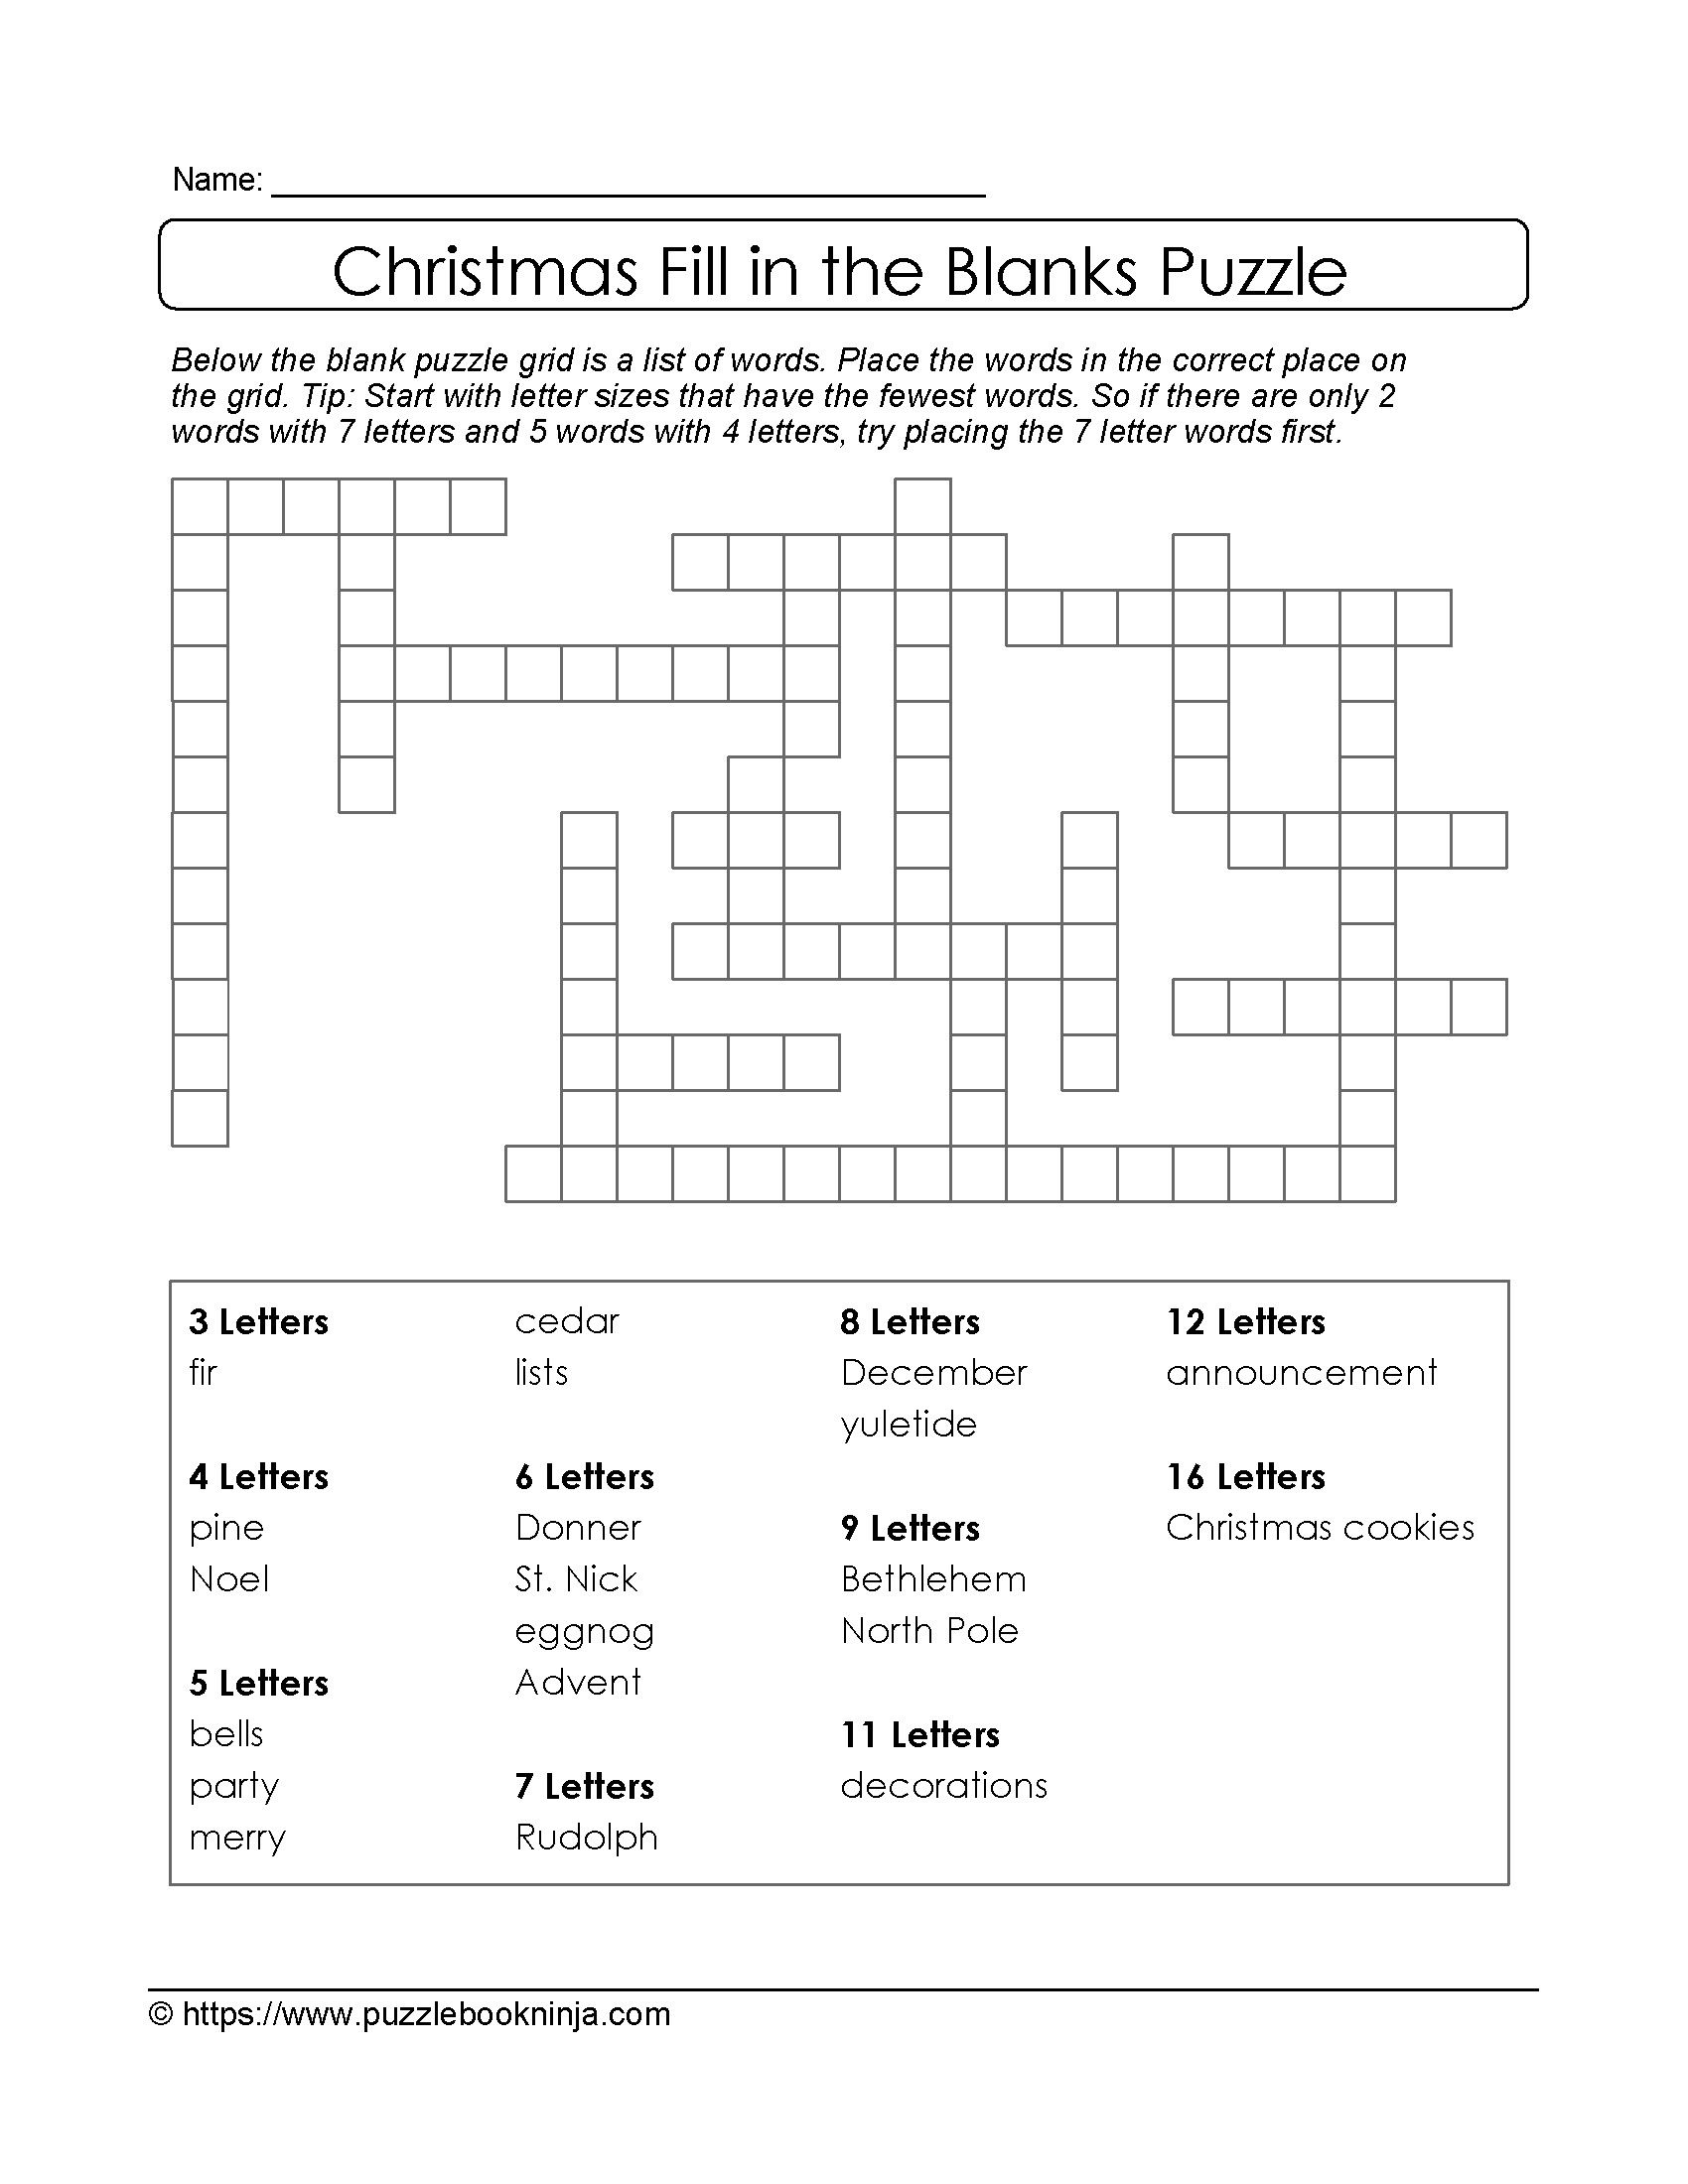 Christmas Printable Puzzle. Free Fill In The Blanks. | Christmas - 9 Letter Word Puzzles Printable